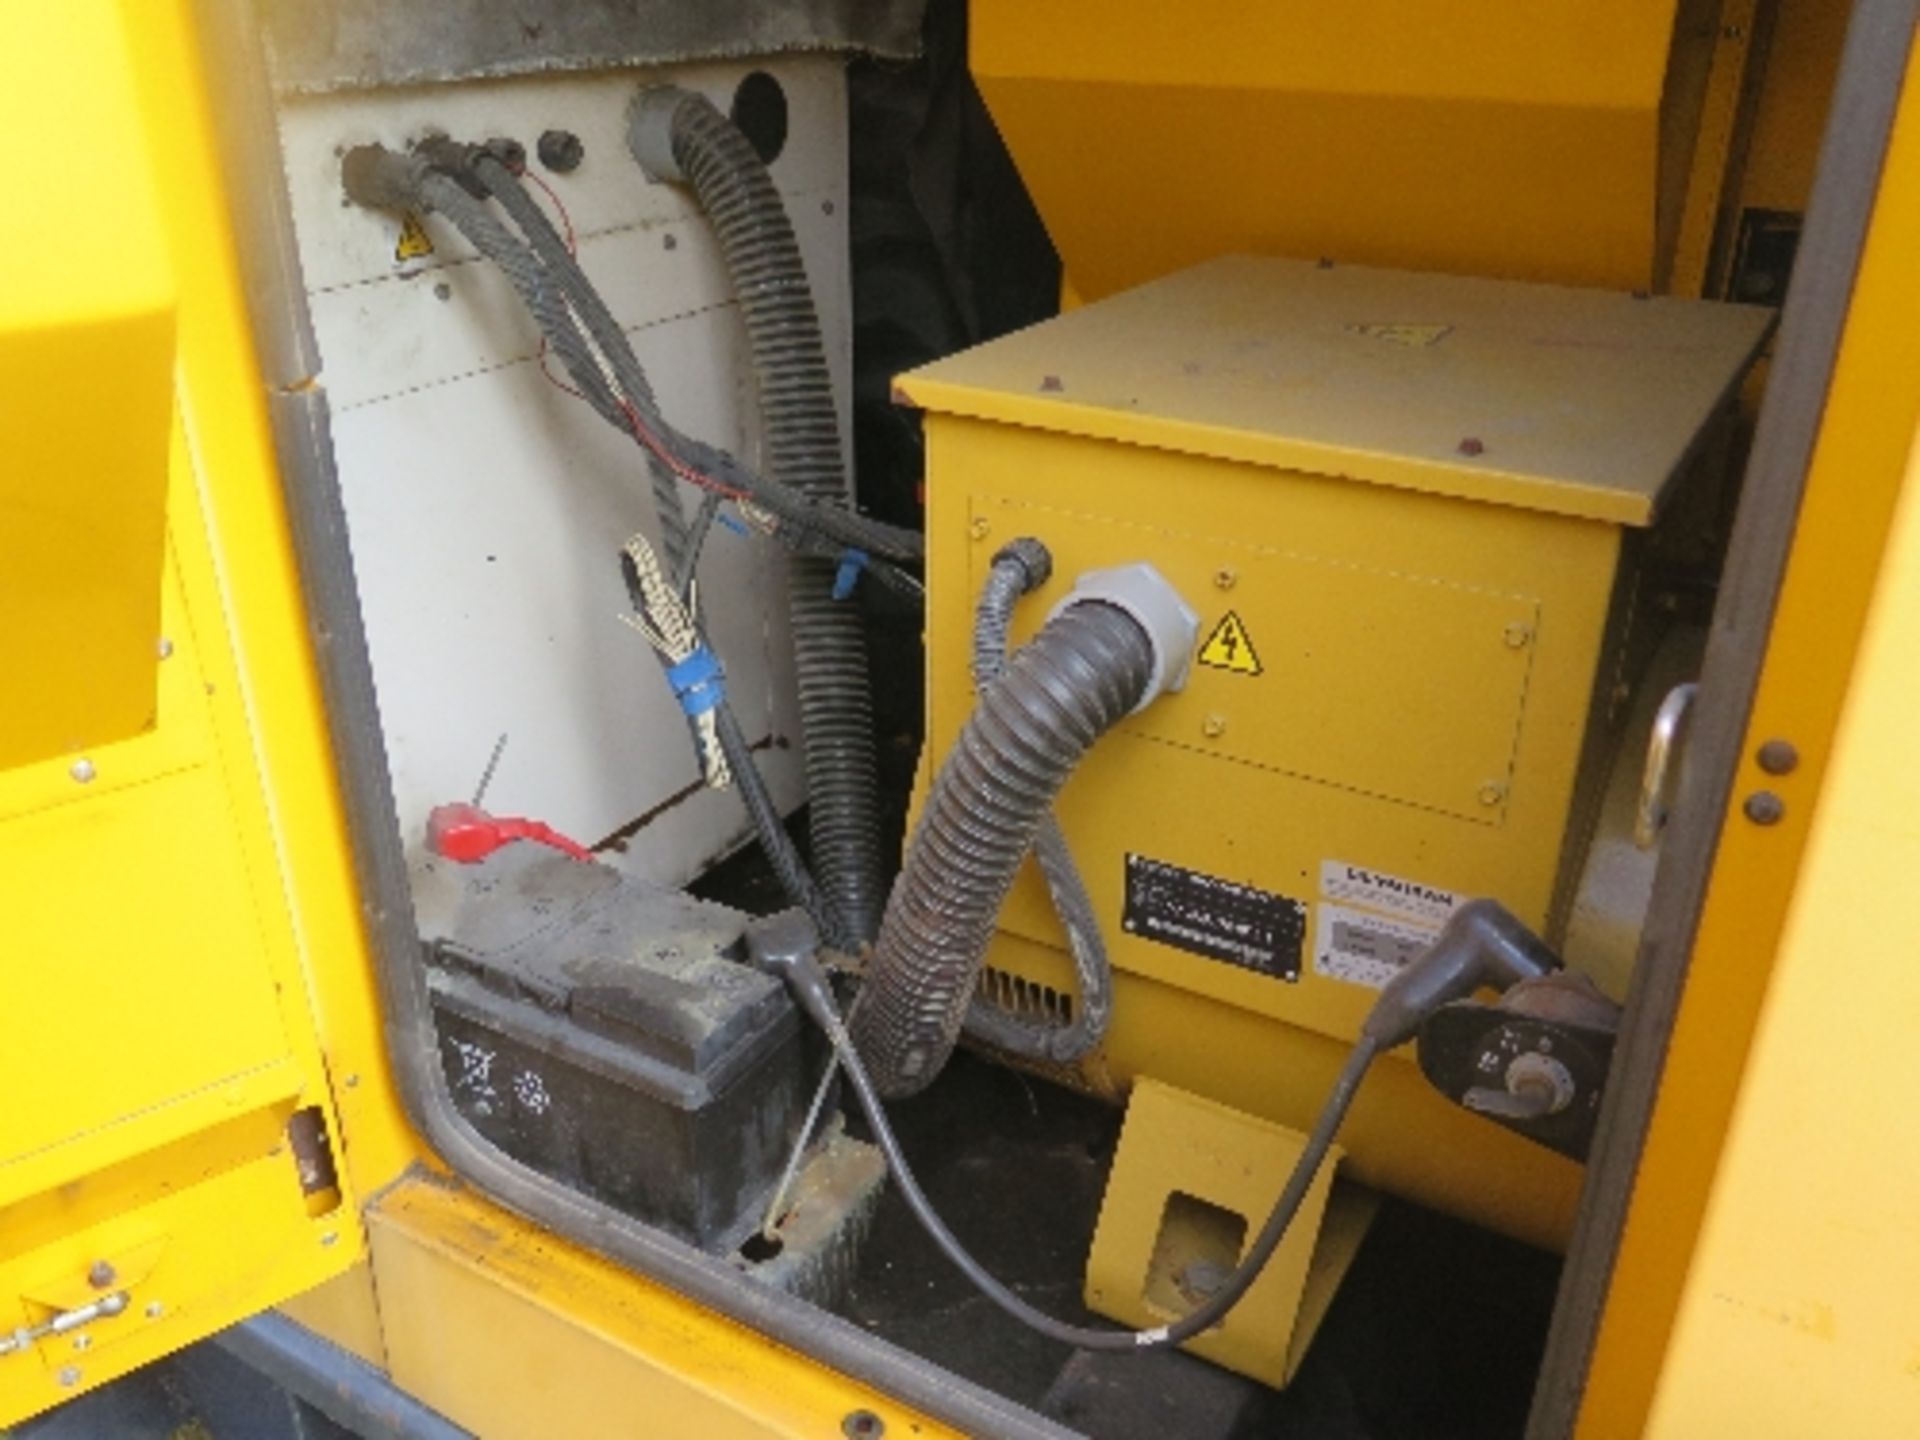 Caterpillar XQE100 generator 158072 12811 hrs
PERKINS - RUNS AND MAKES POWER
ALL LOTS are SOLD - Image 5 of 6